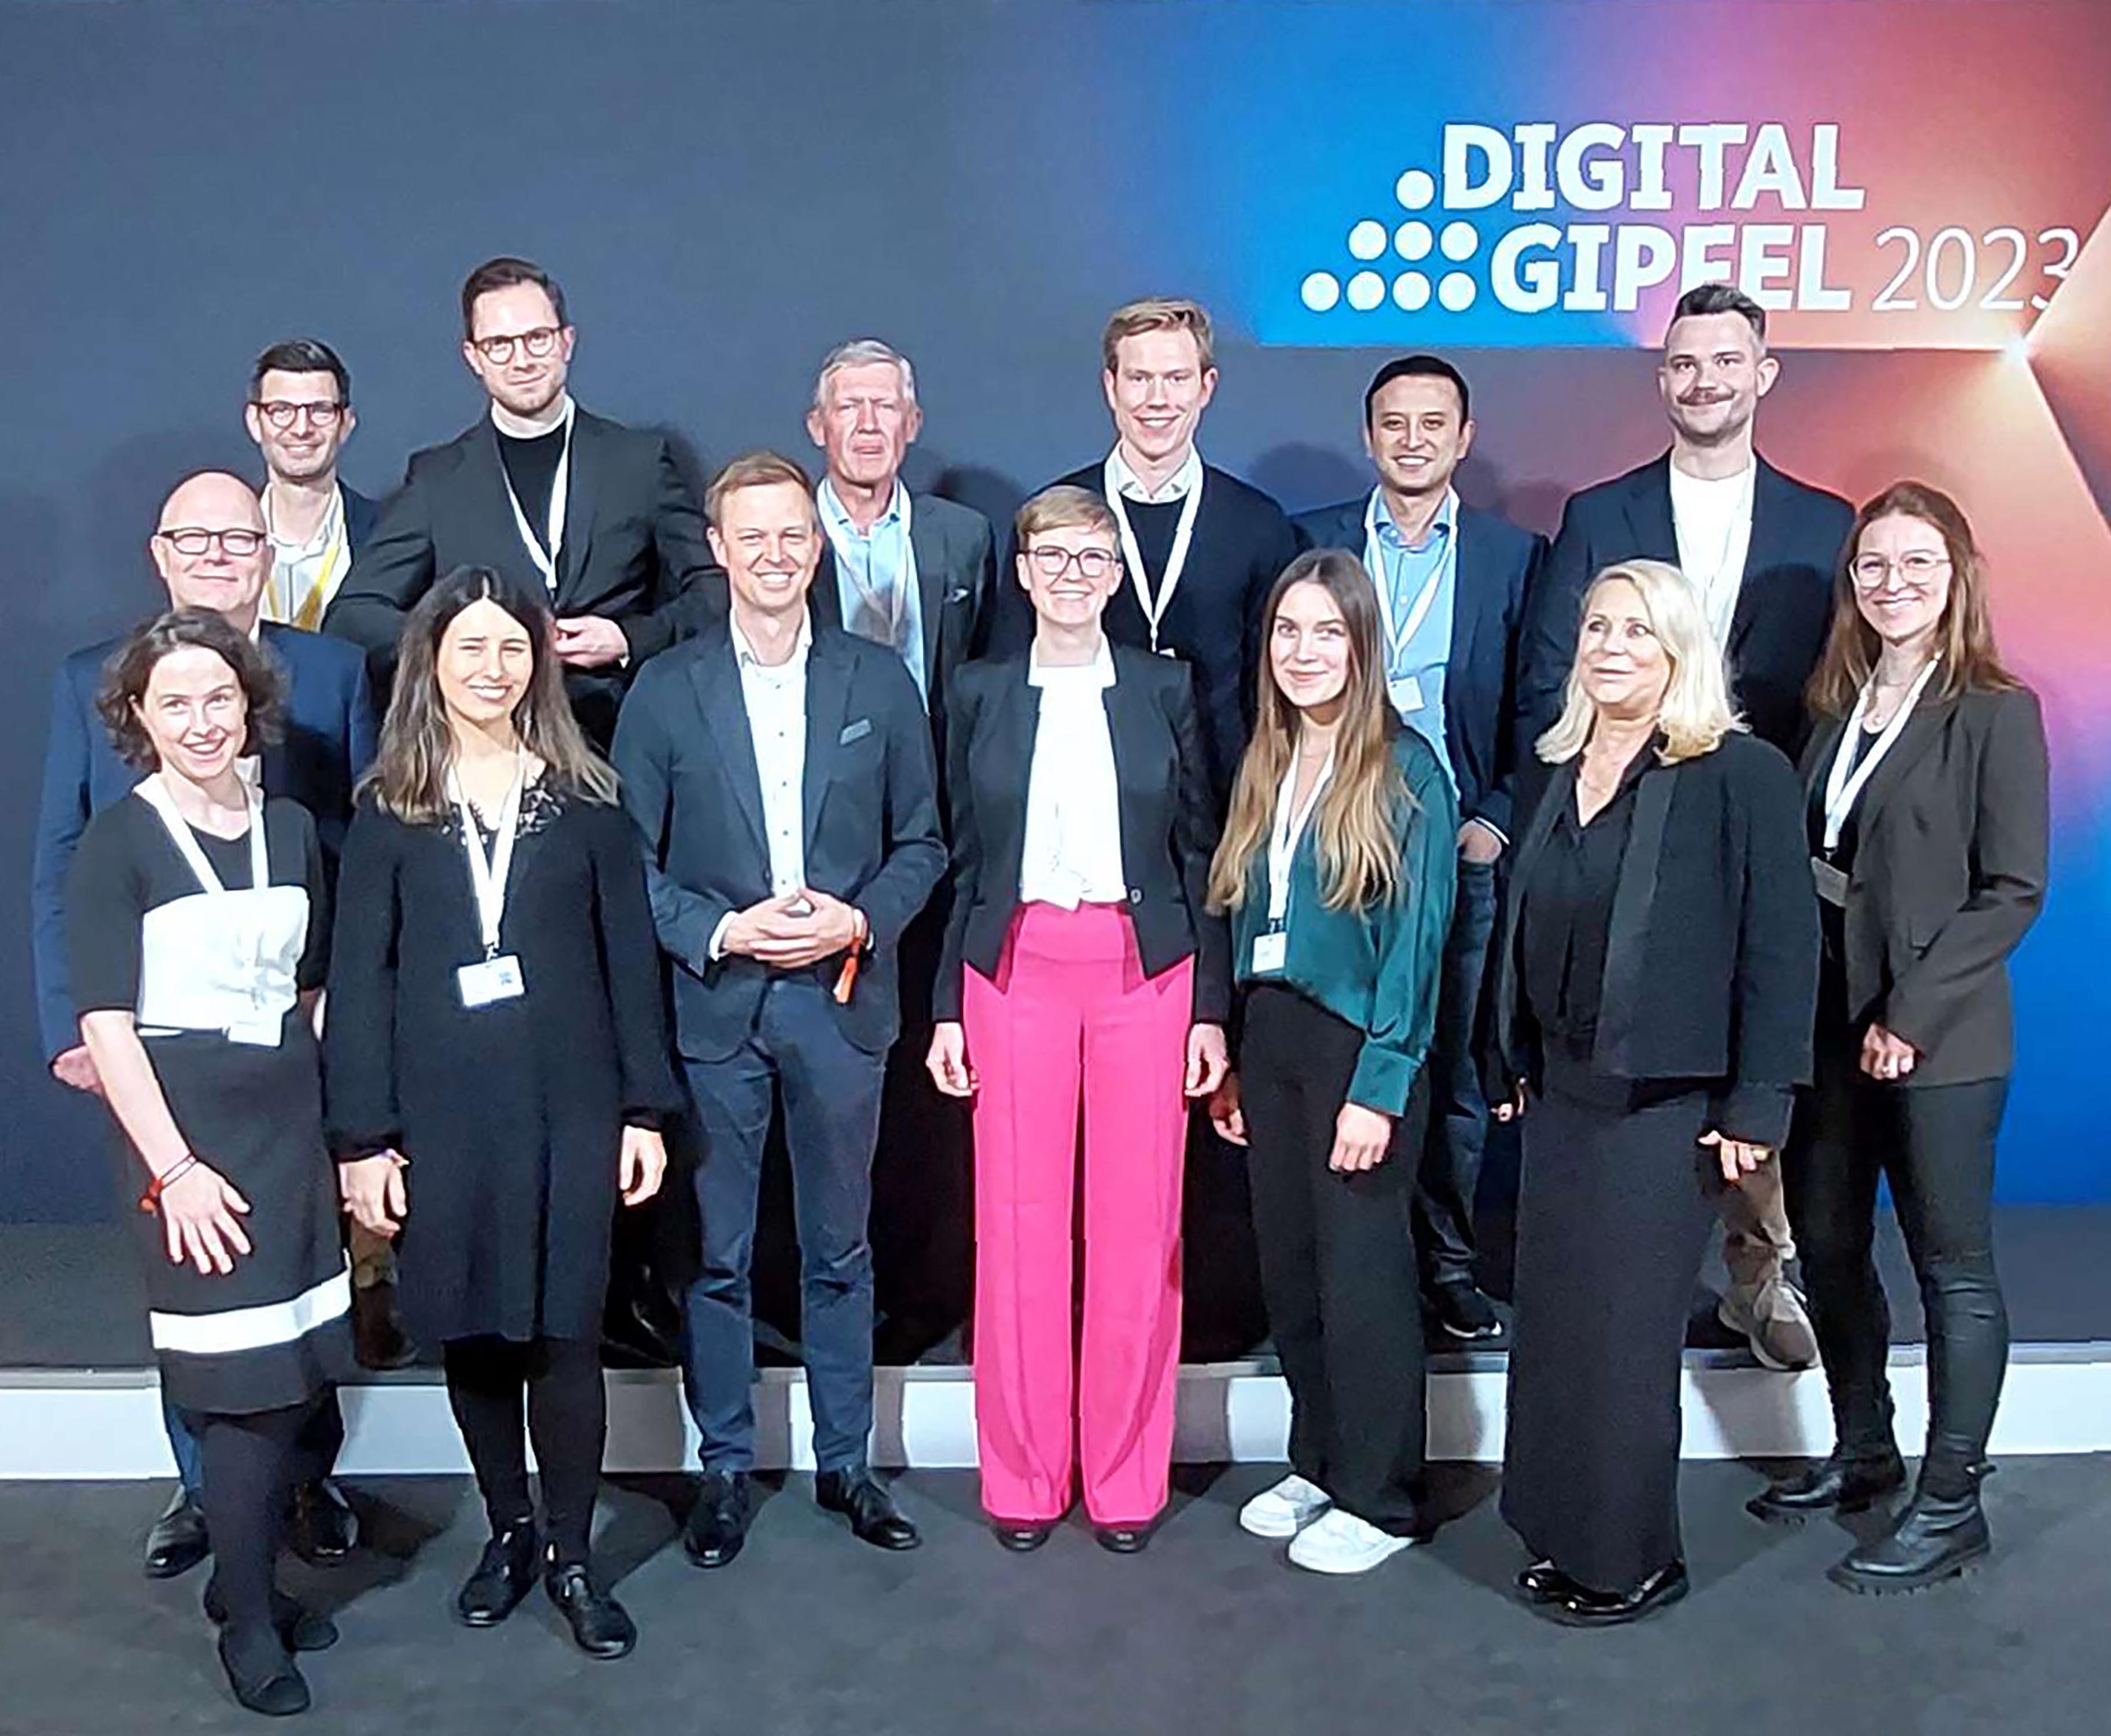 The picture shows a group of people posing and smiling for the camera. They are standing in front of a wall with the Digital Summit logo on it.